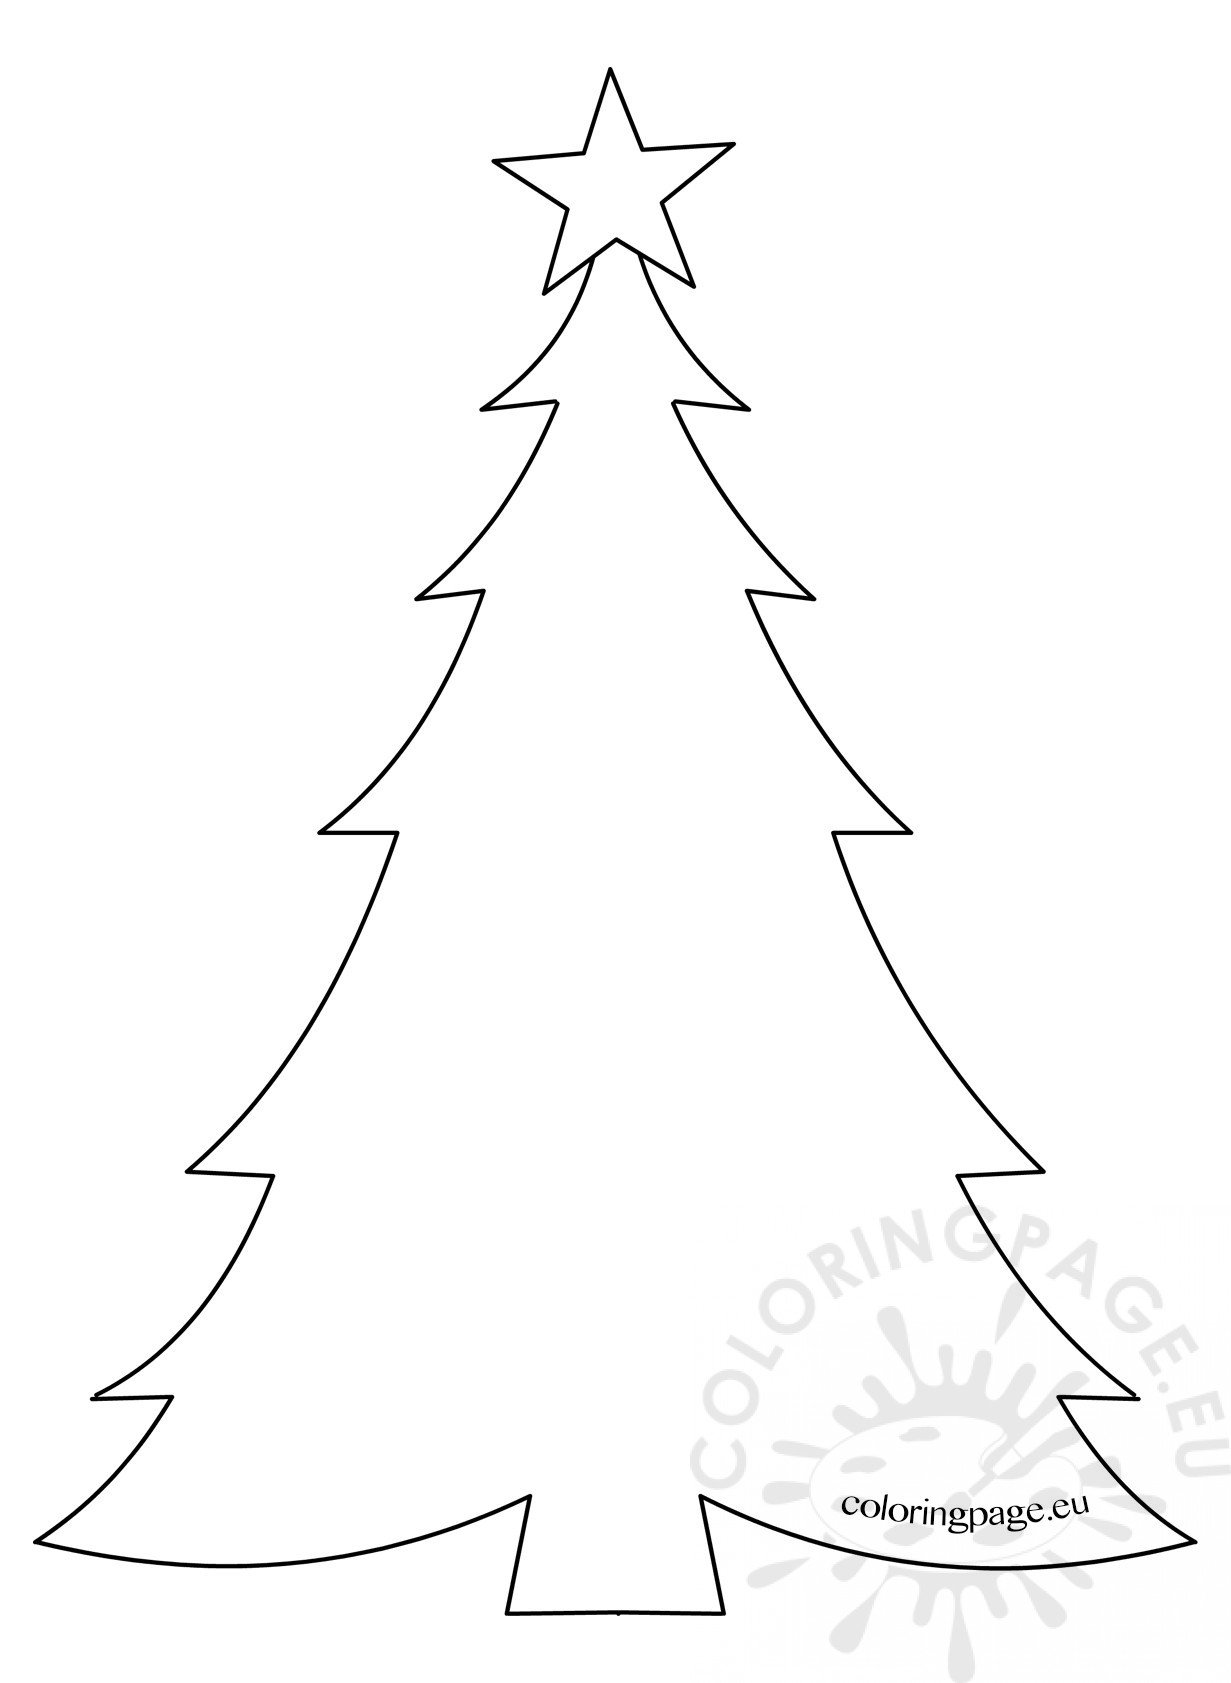 tree christmas template star coloring drawing printable templates blank trees sheets getdrawings holiday kittybabylove coloringpage eu source